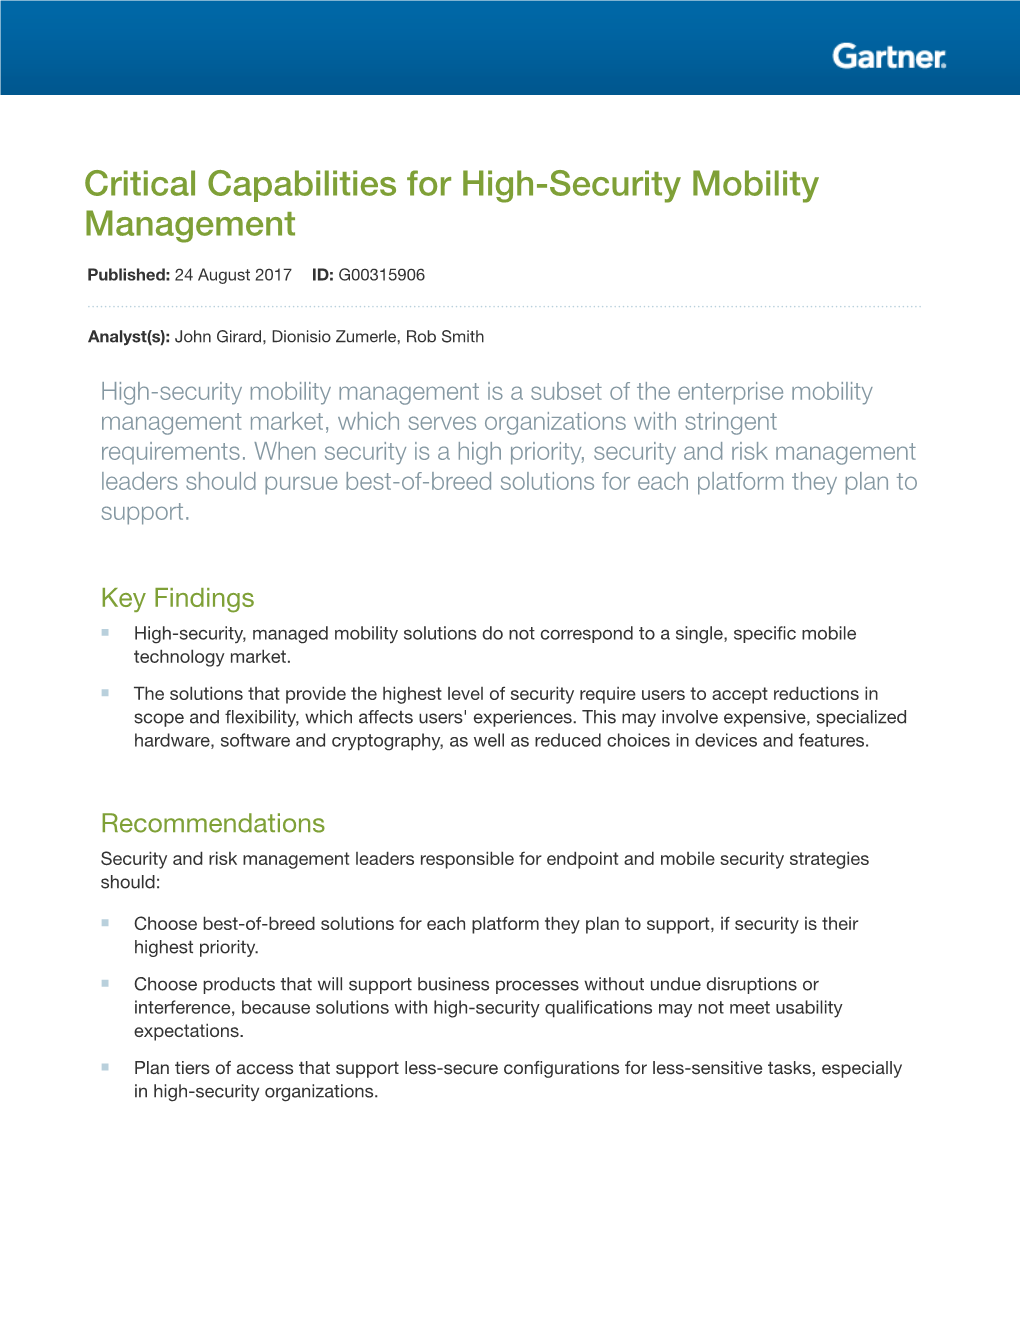 Critical Capabilities for High-Security Mobility Management